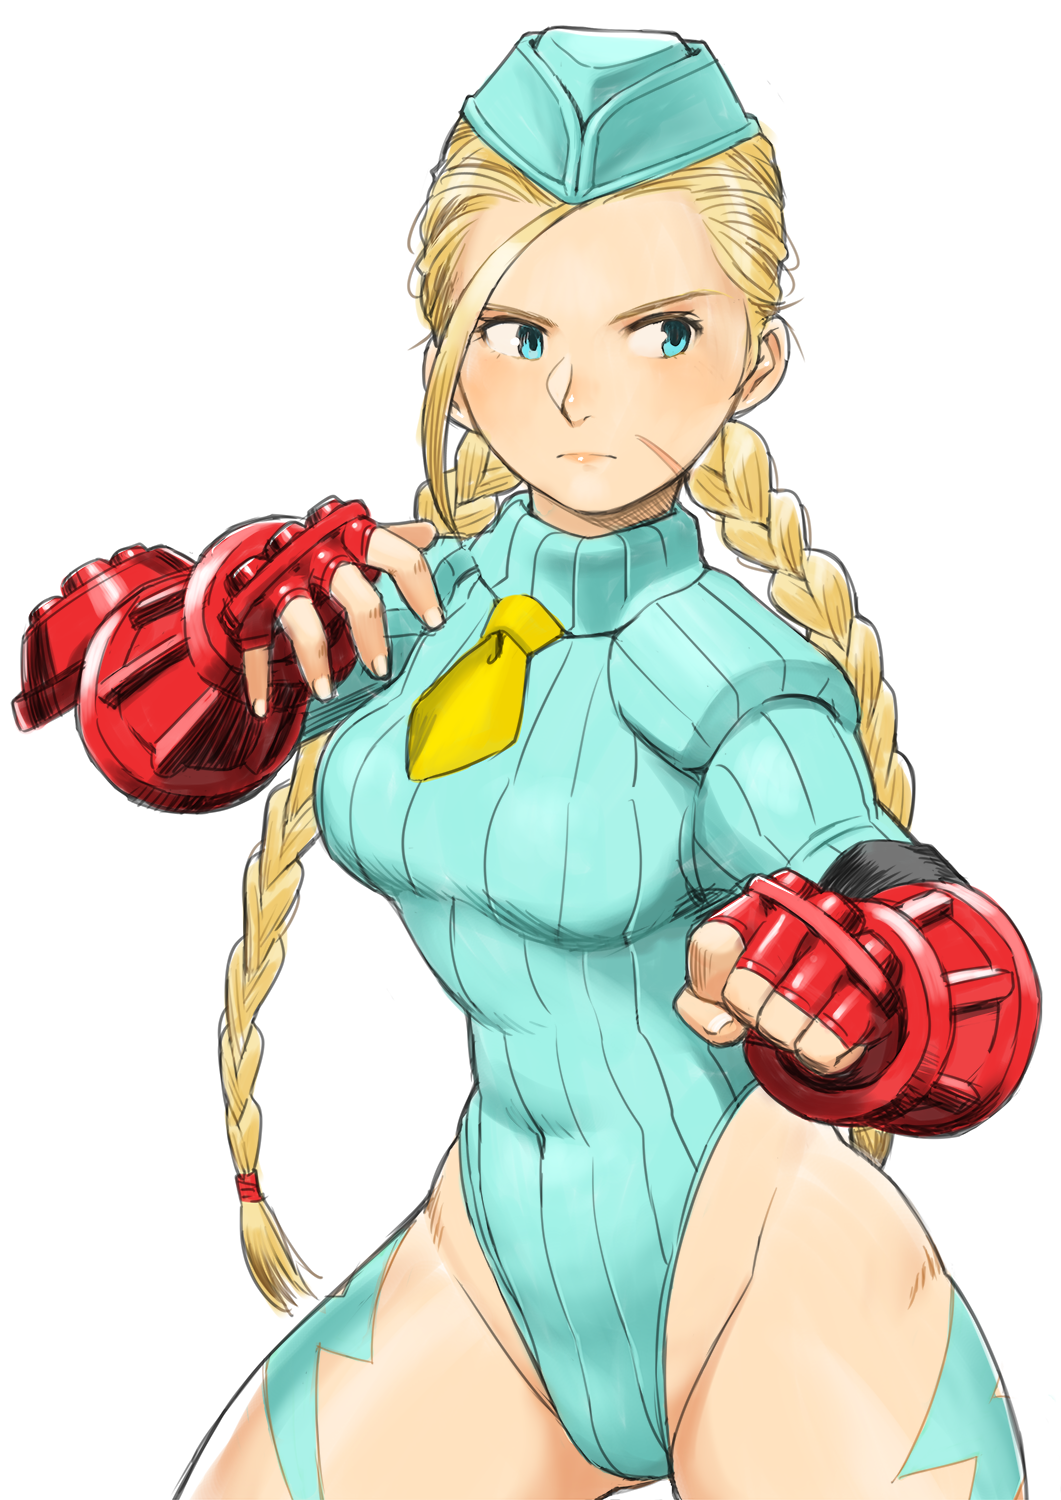 cammy white (street fighter and 1 more) drawn by shigenobu